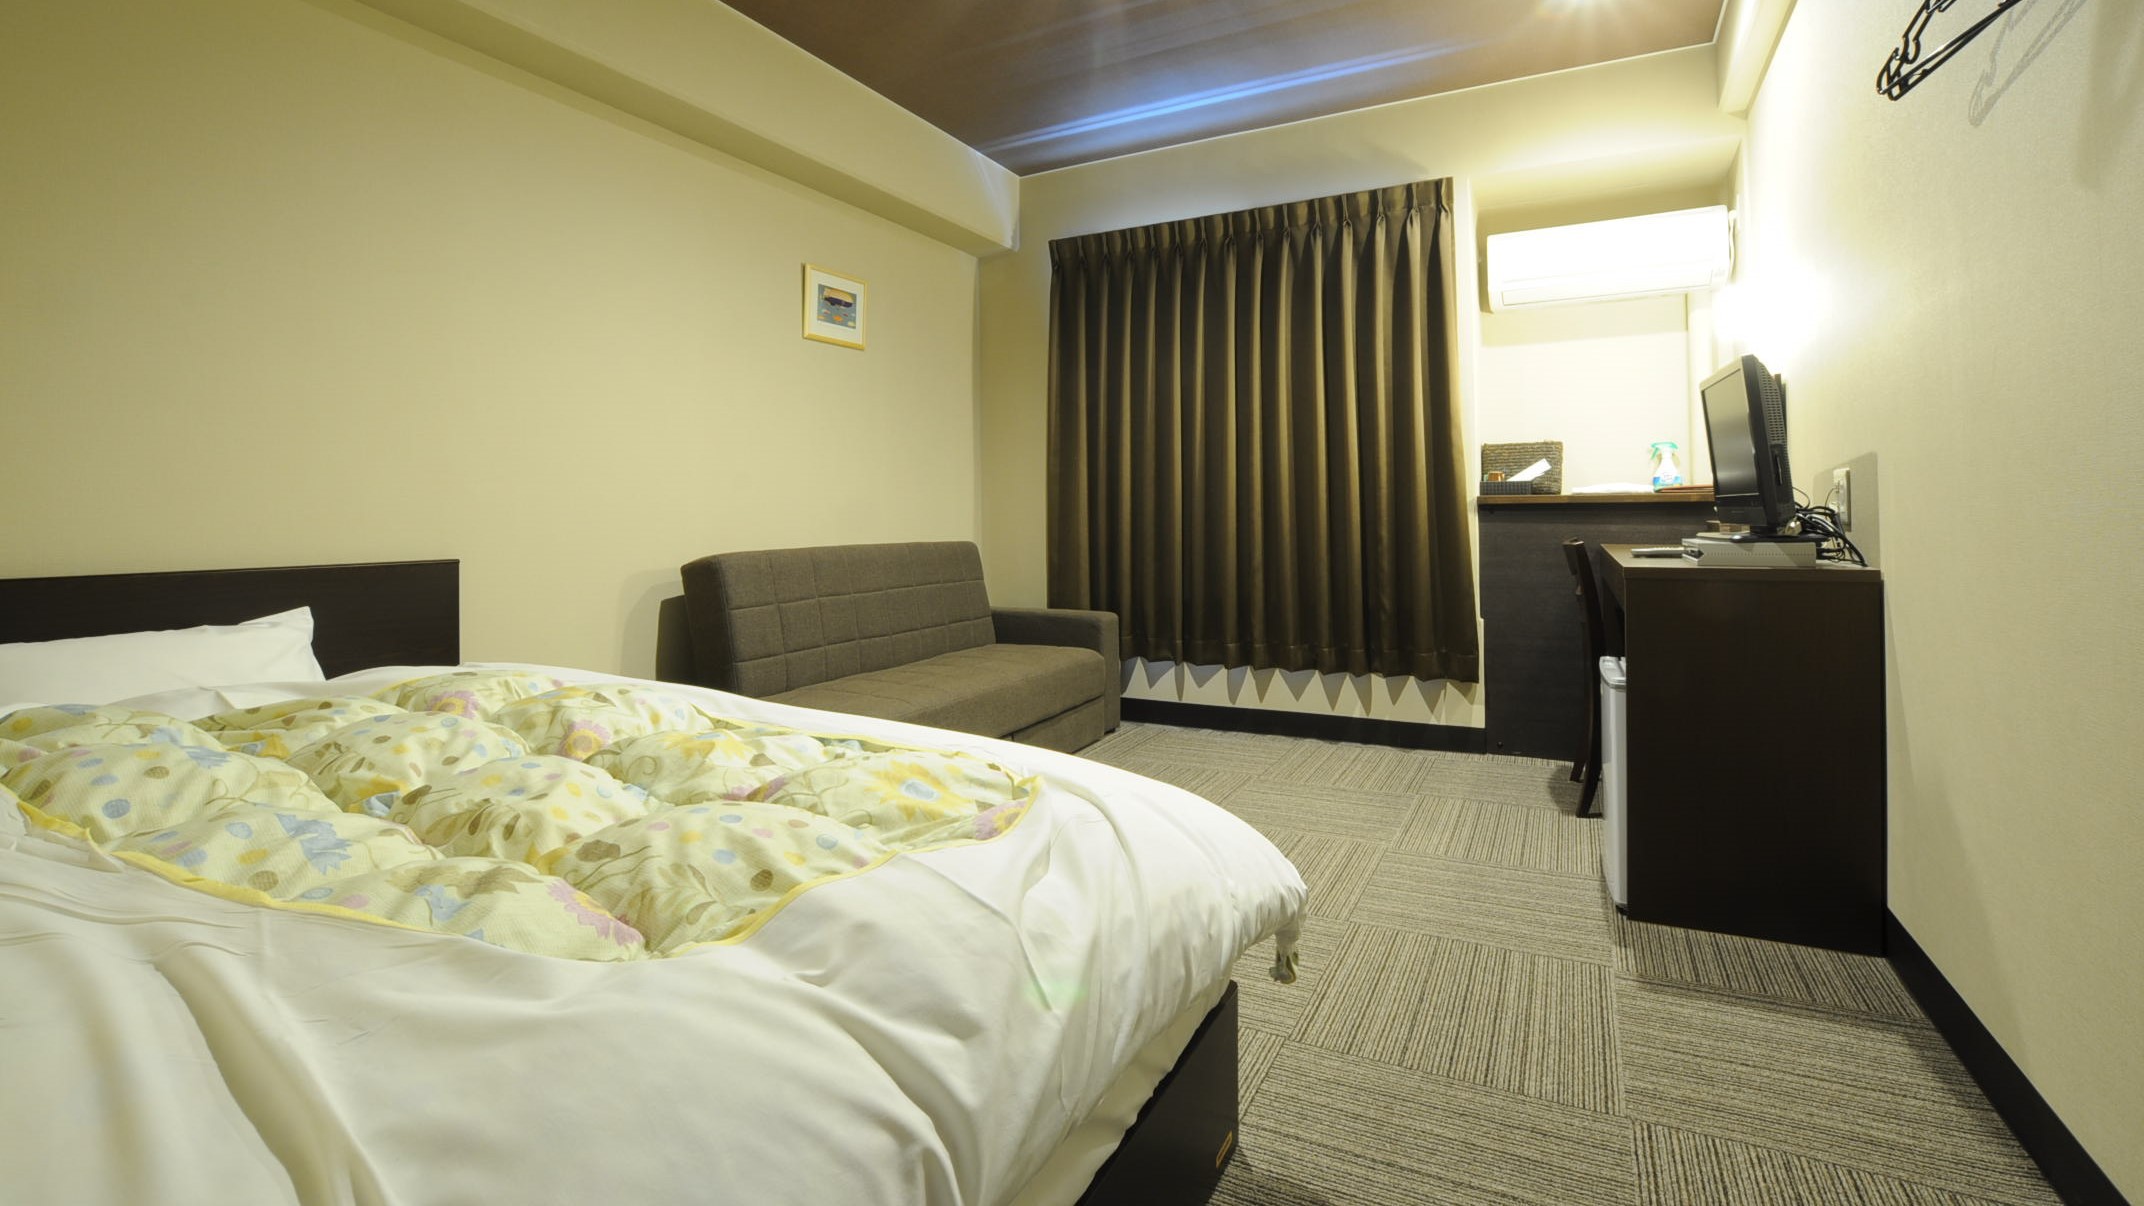 Business Inn Fukuyama Business Inn Fukuyama is conveniently located in the popular Fukuyama area. Both business travelers and tourists can enjoy the propertys facilities and services. Take advantage of the propertys free